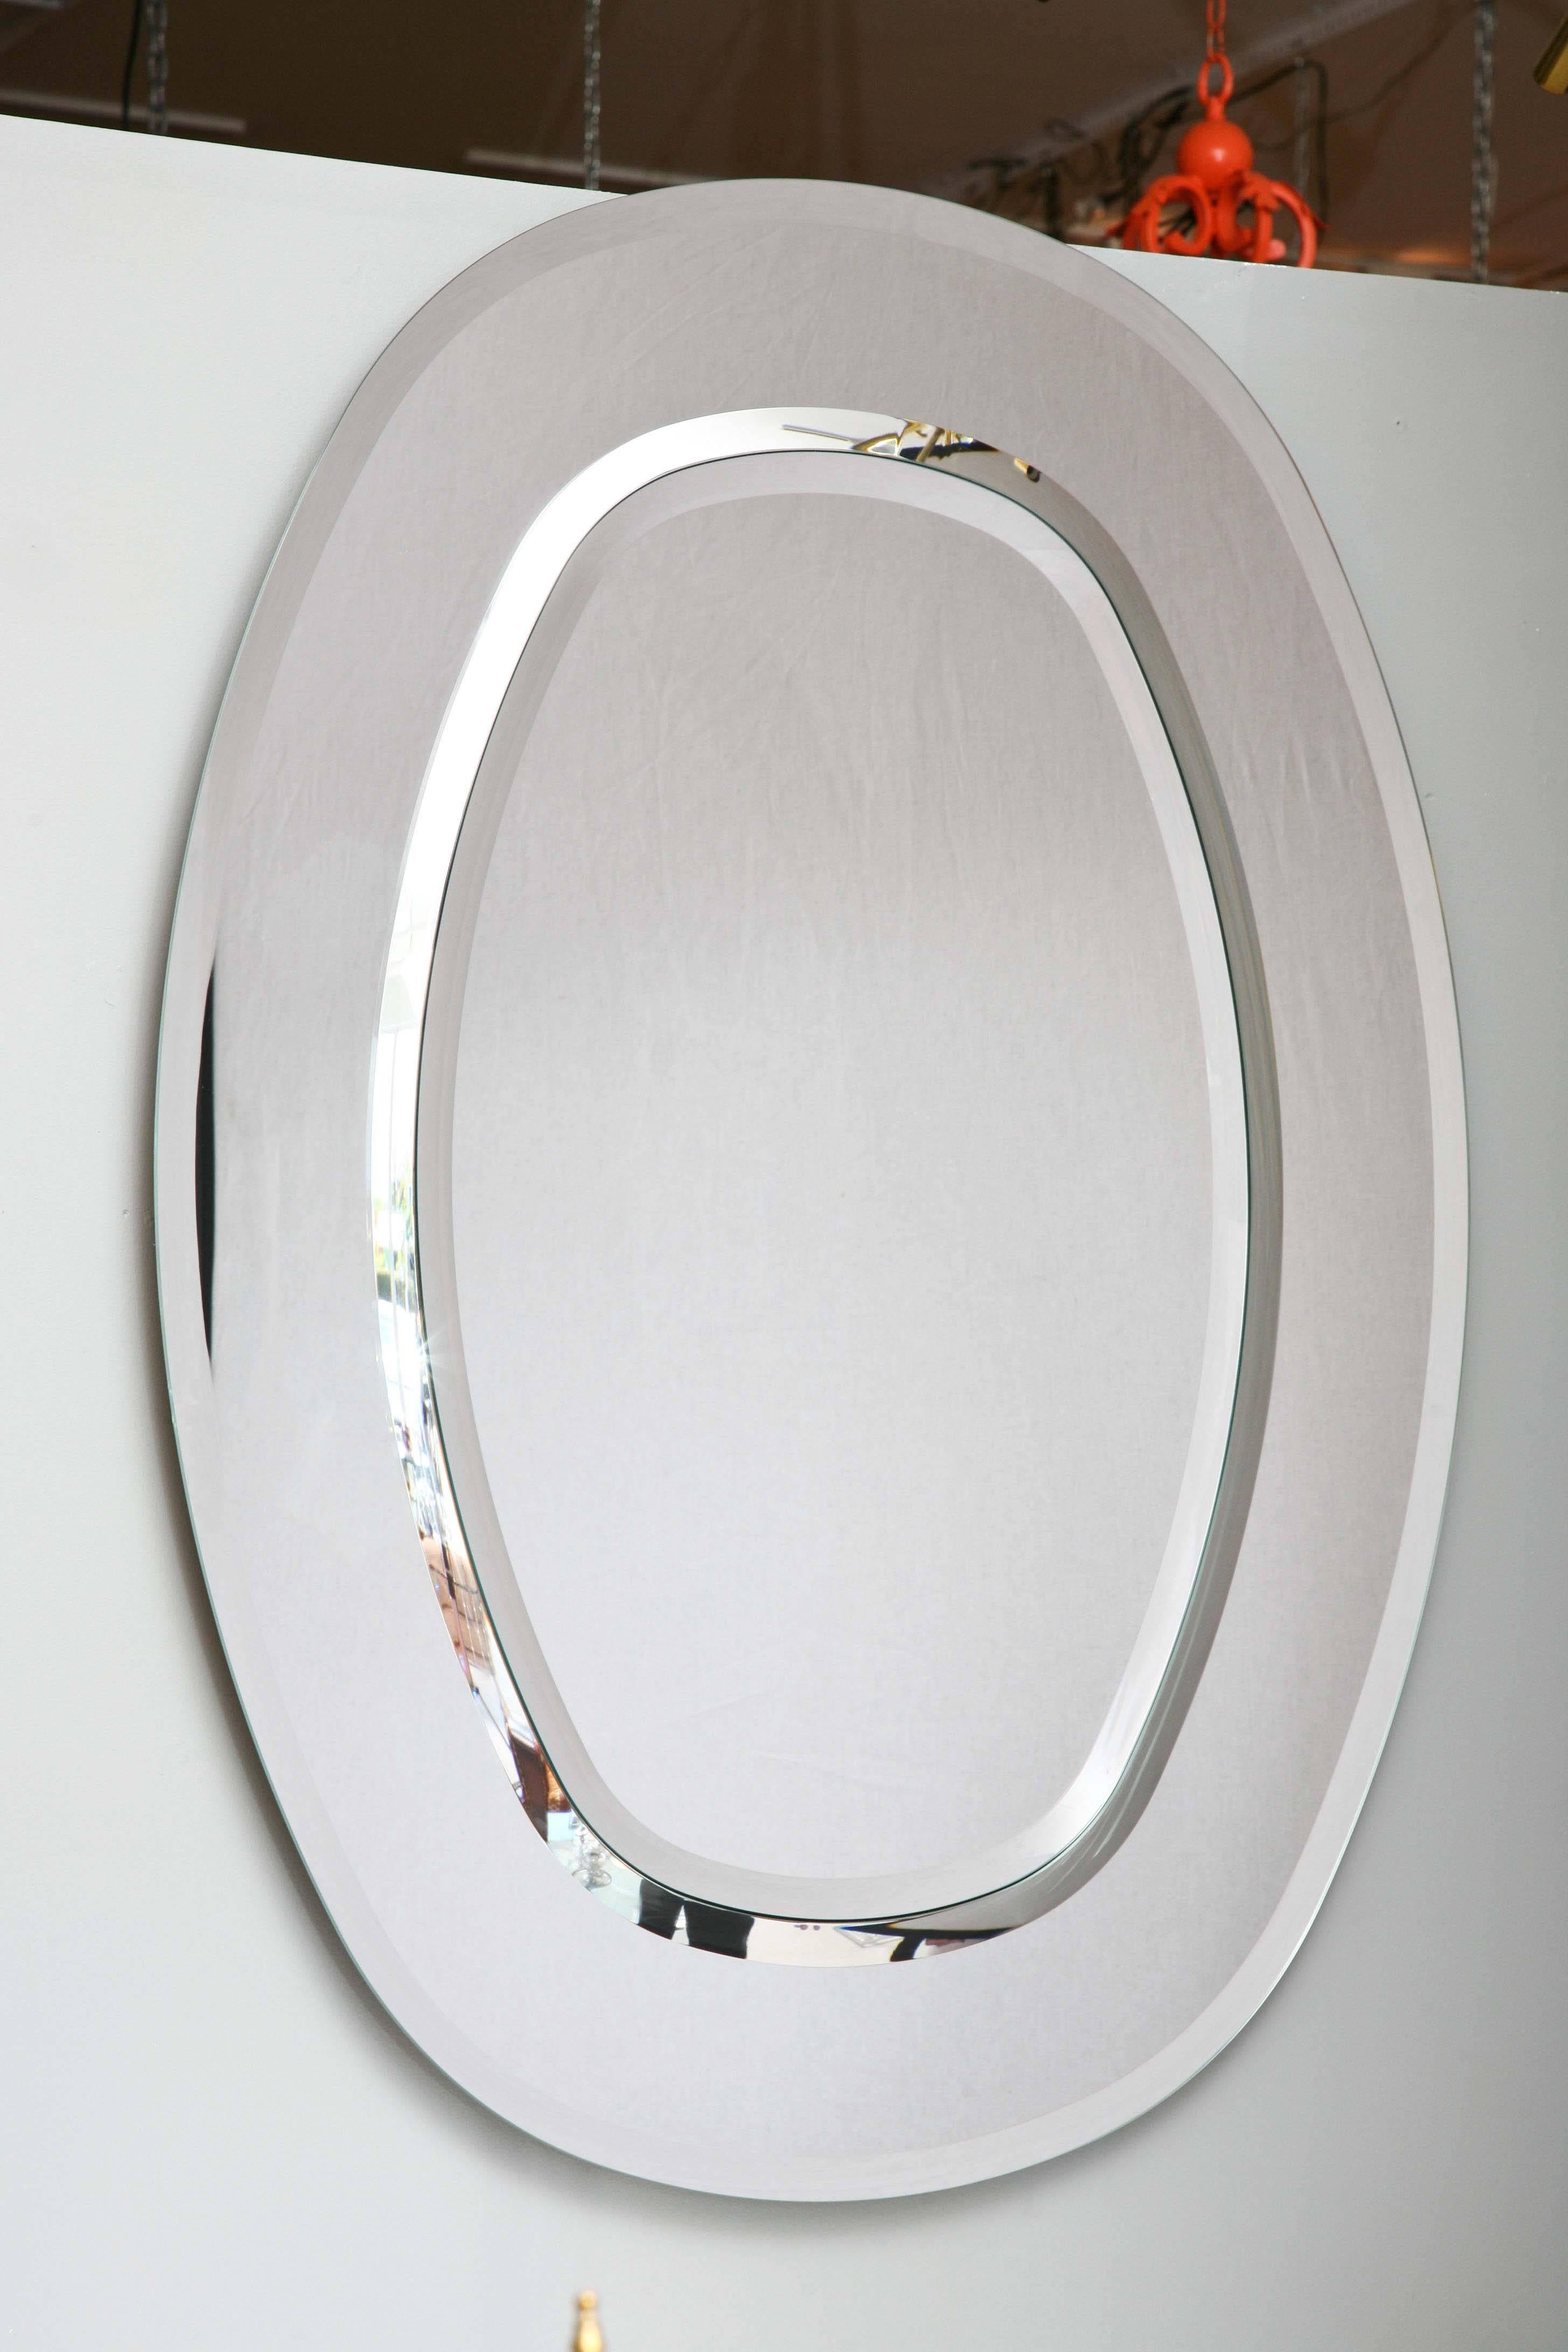 Colorless oval mirror made in Italy with simple profile and soft bevel to edge.

Two Available 